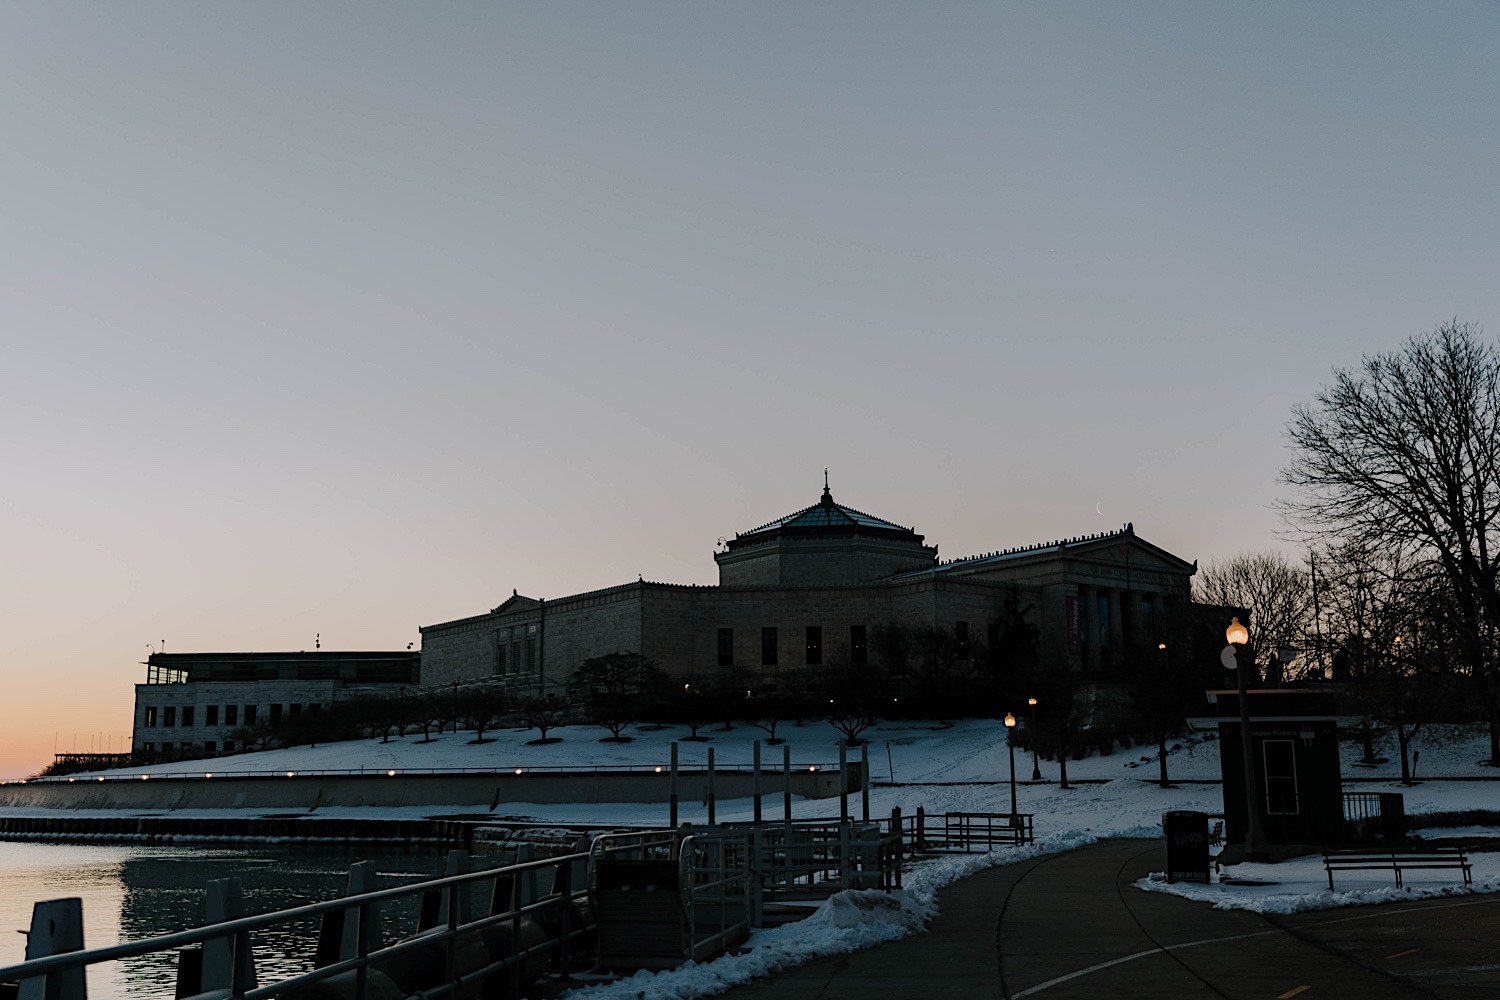 Chicago Planetarium surrounded by snow at sunrise